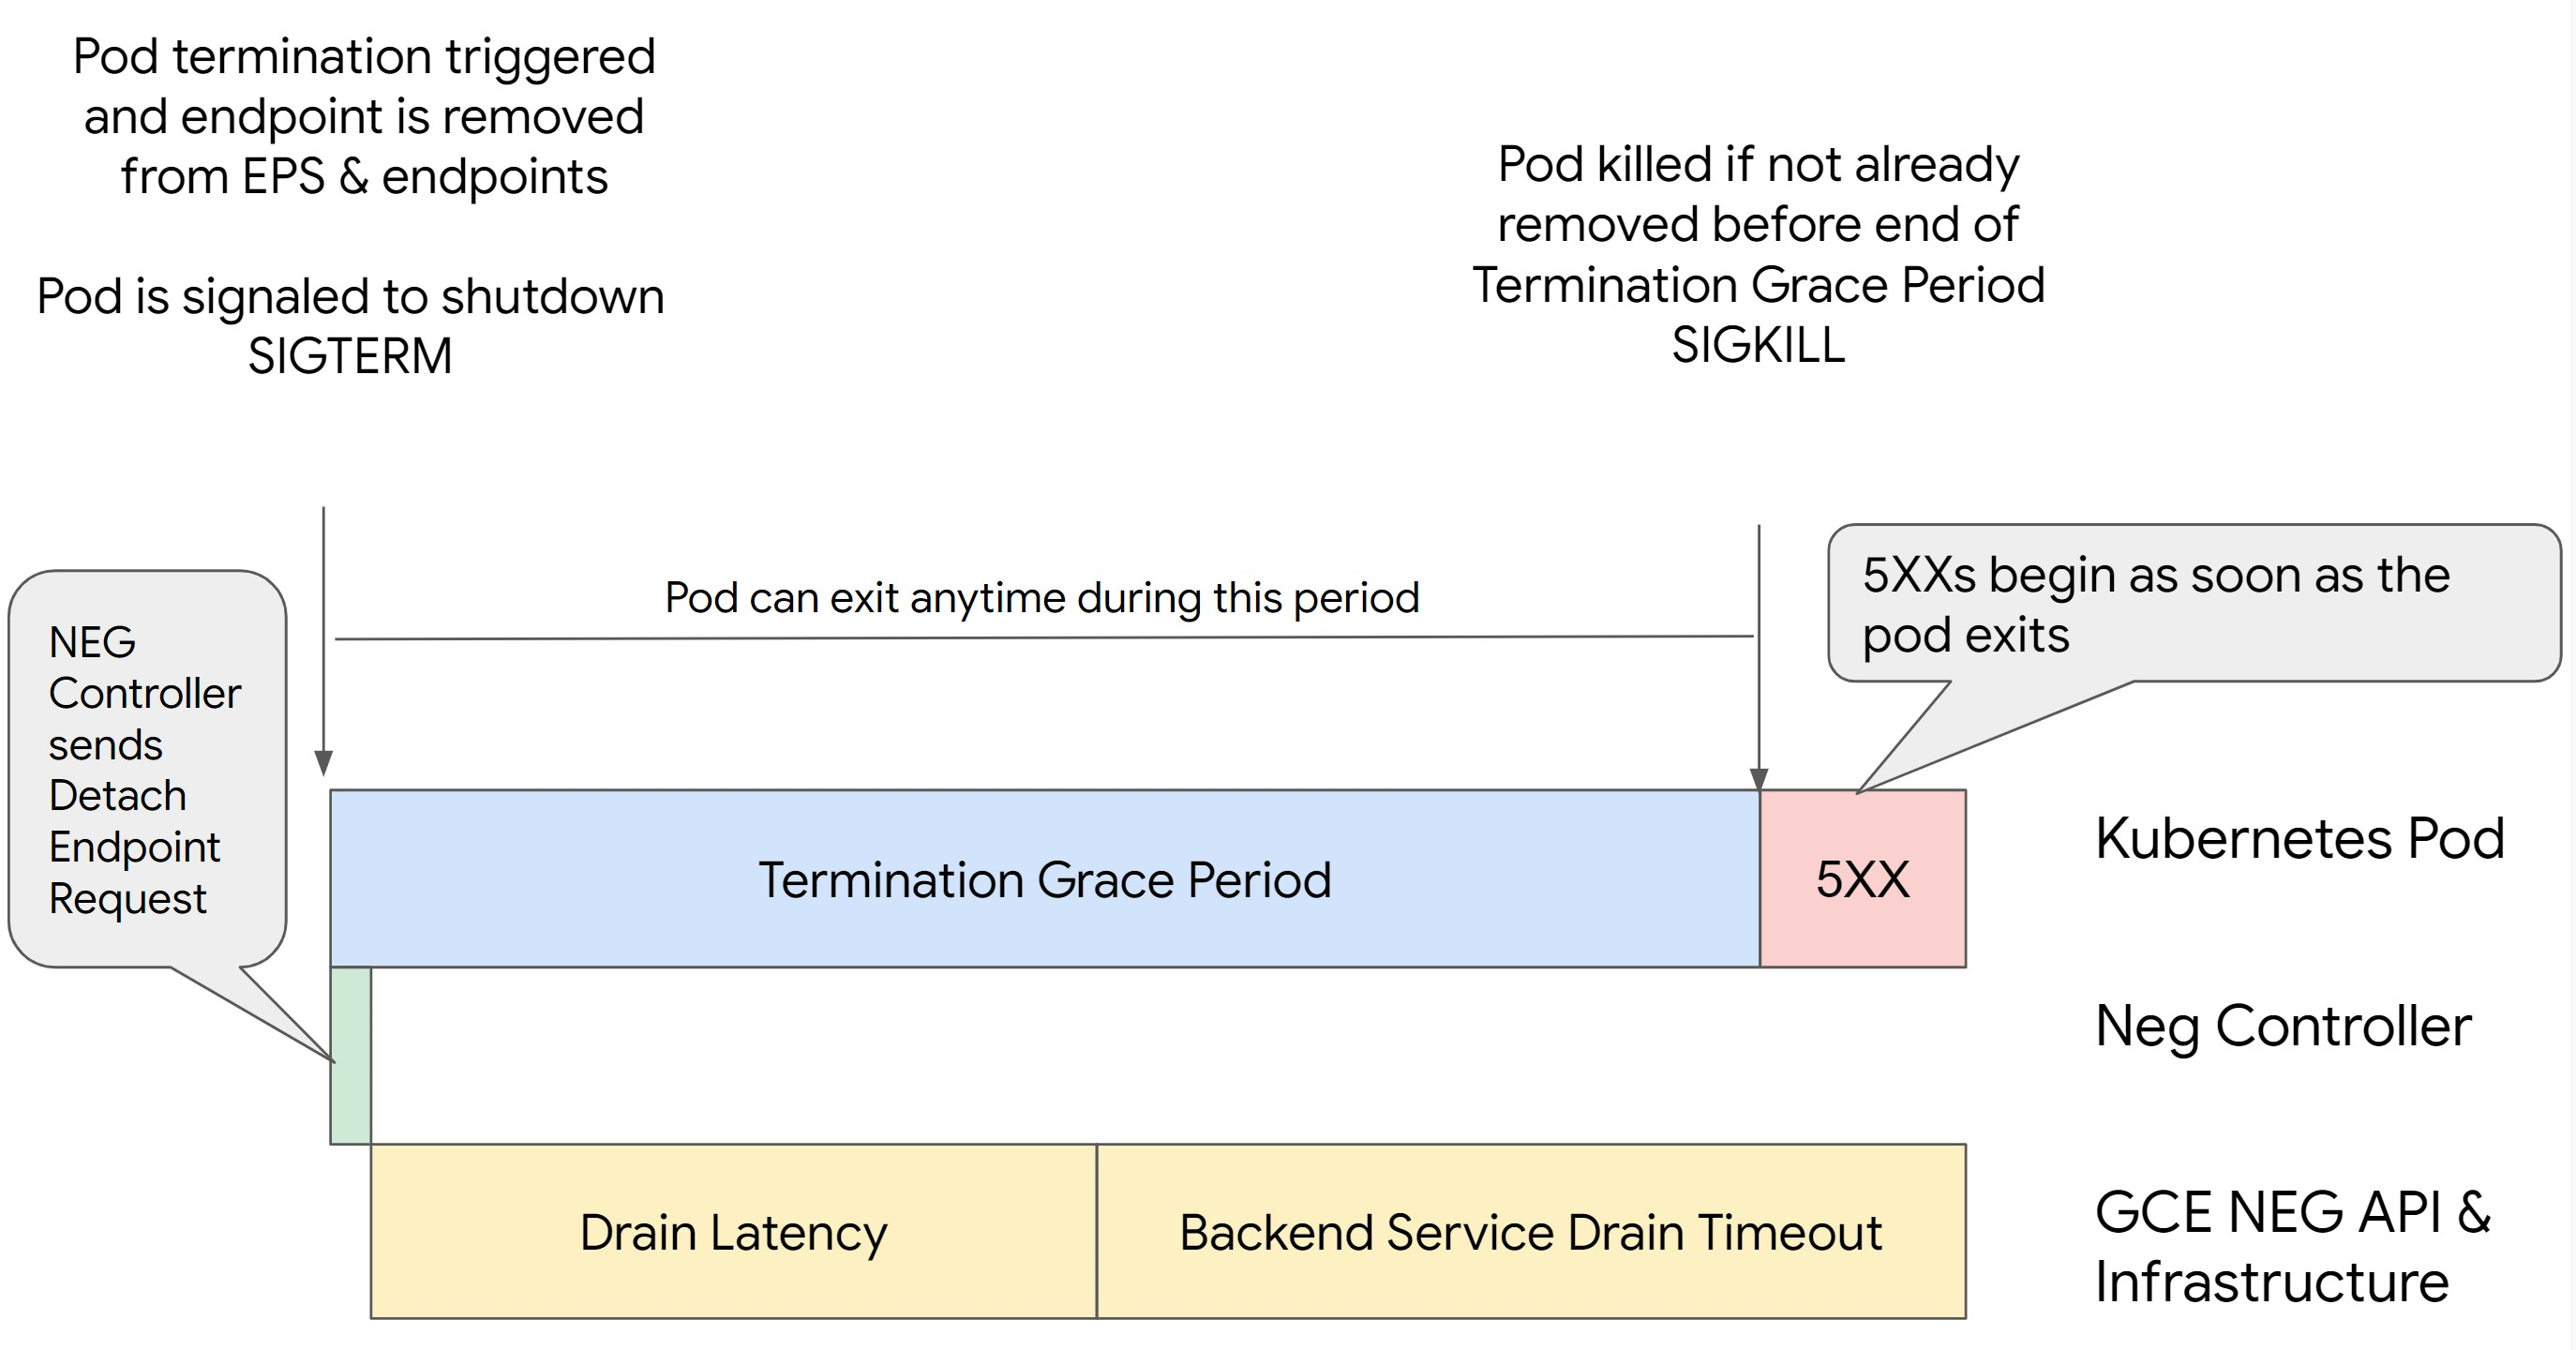 BackendService Drain Timeout is set